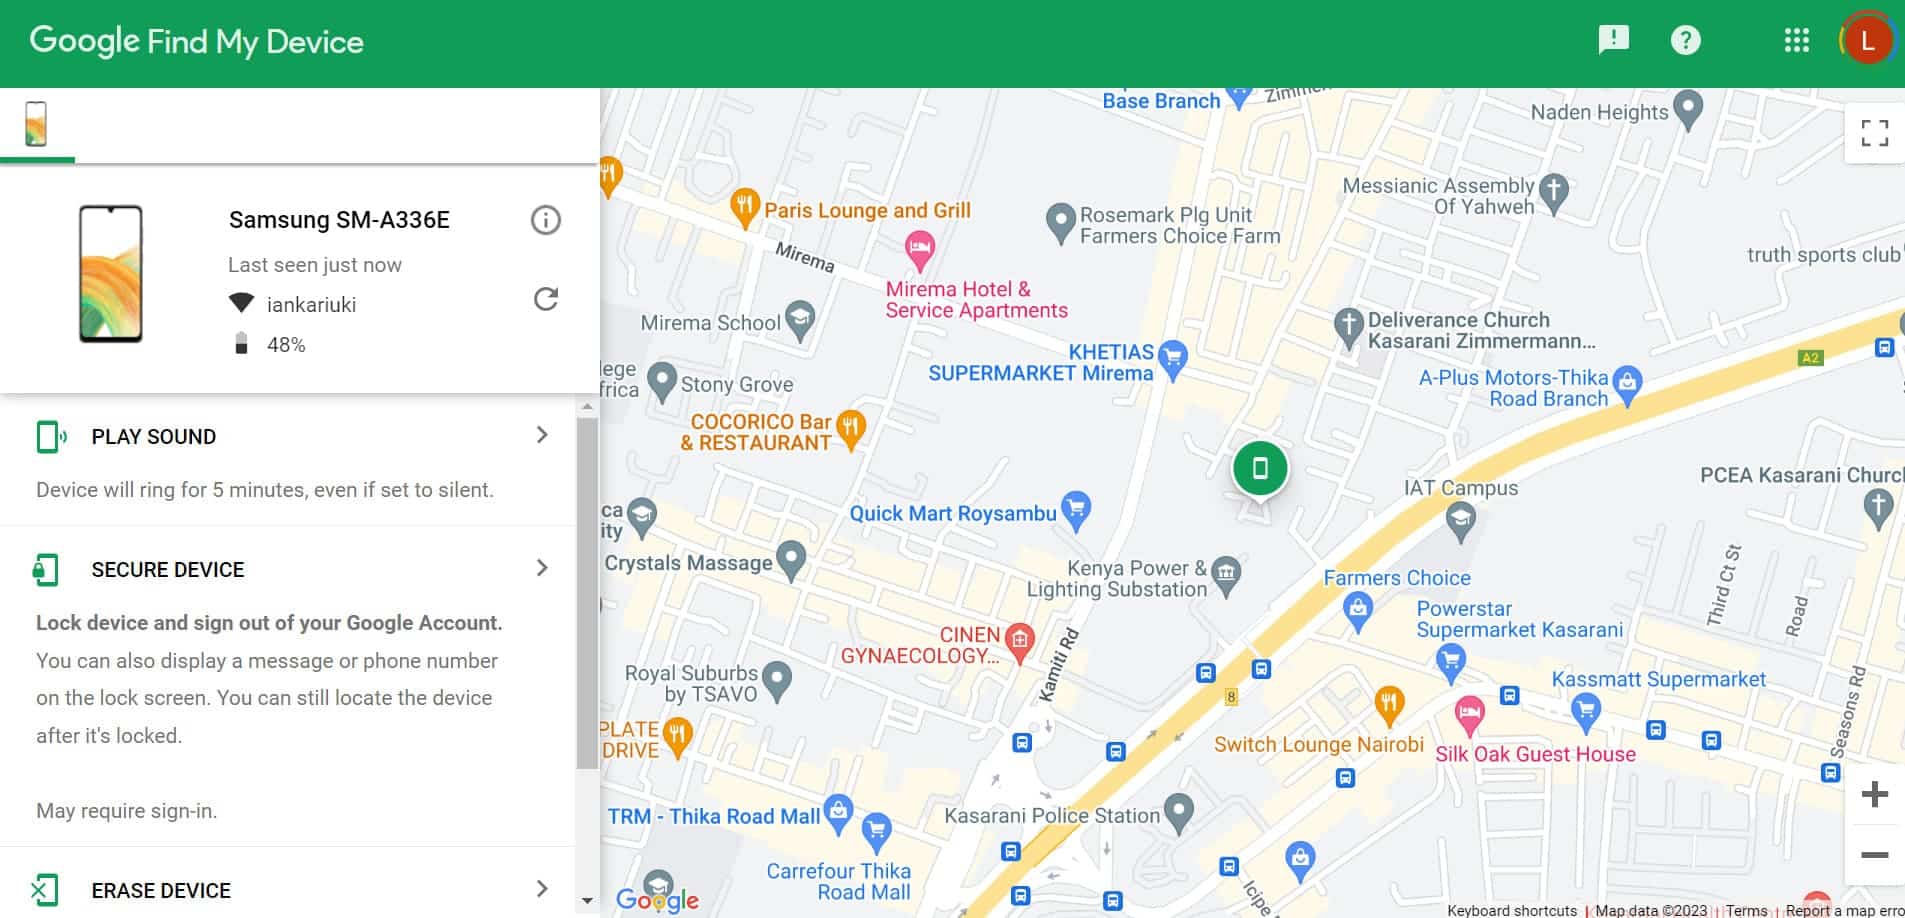 Google Find My Device showing a device’s location on a map